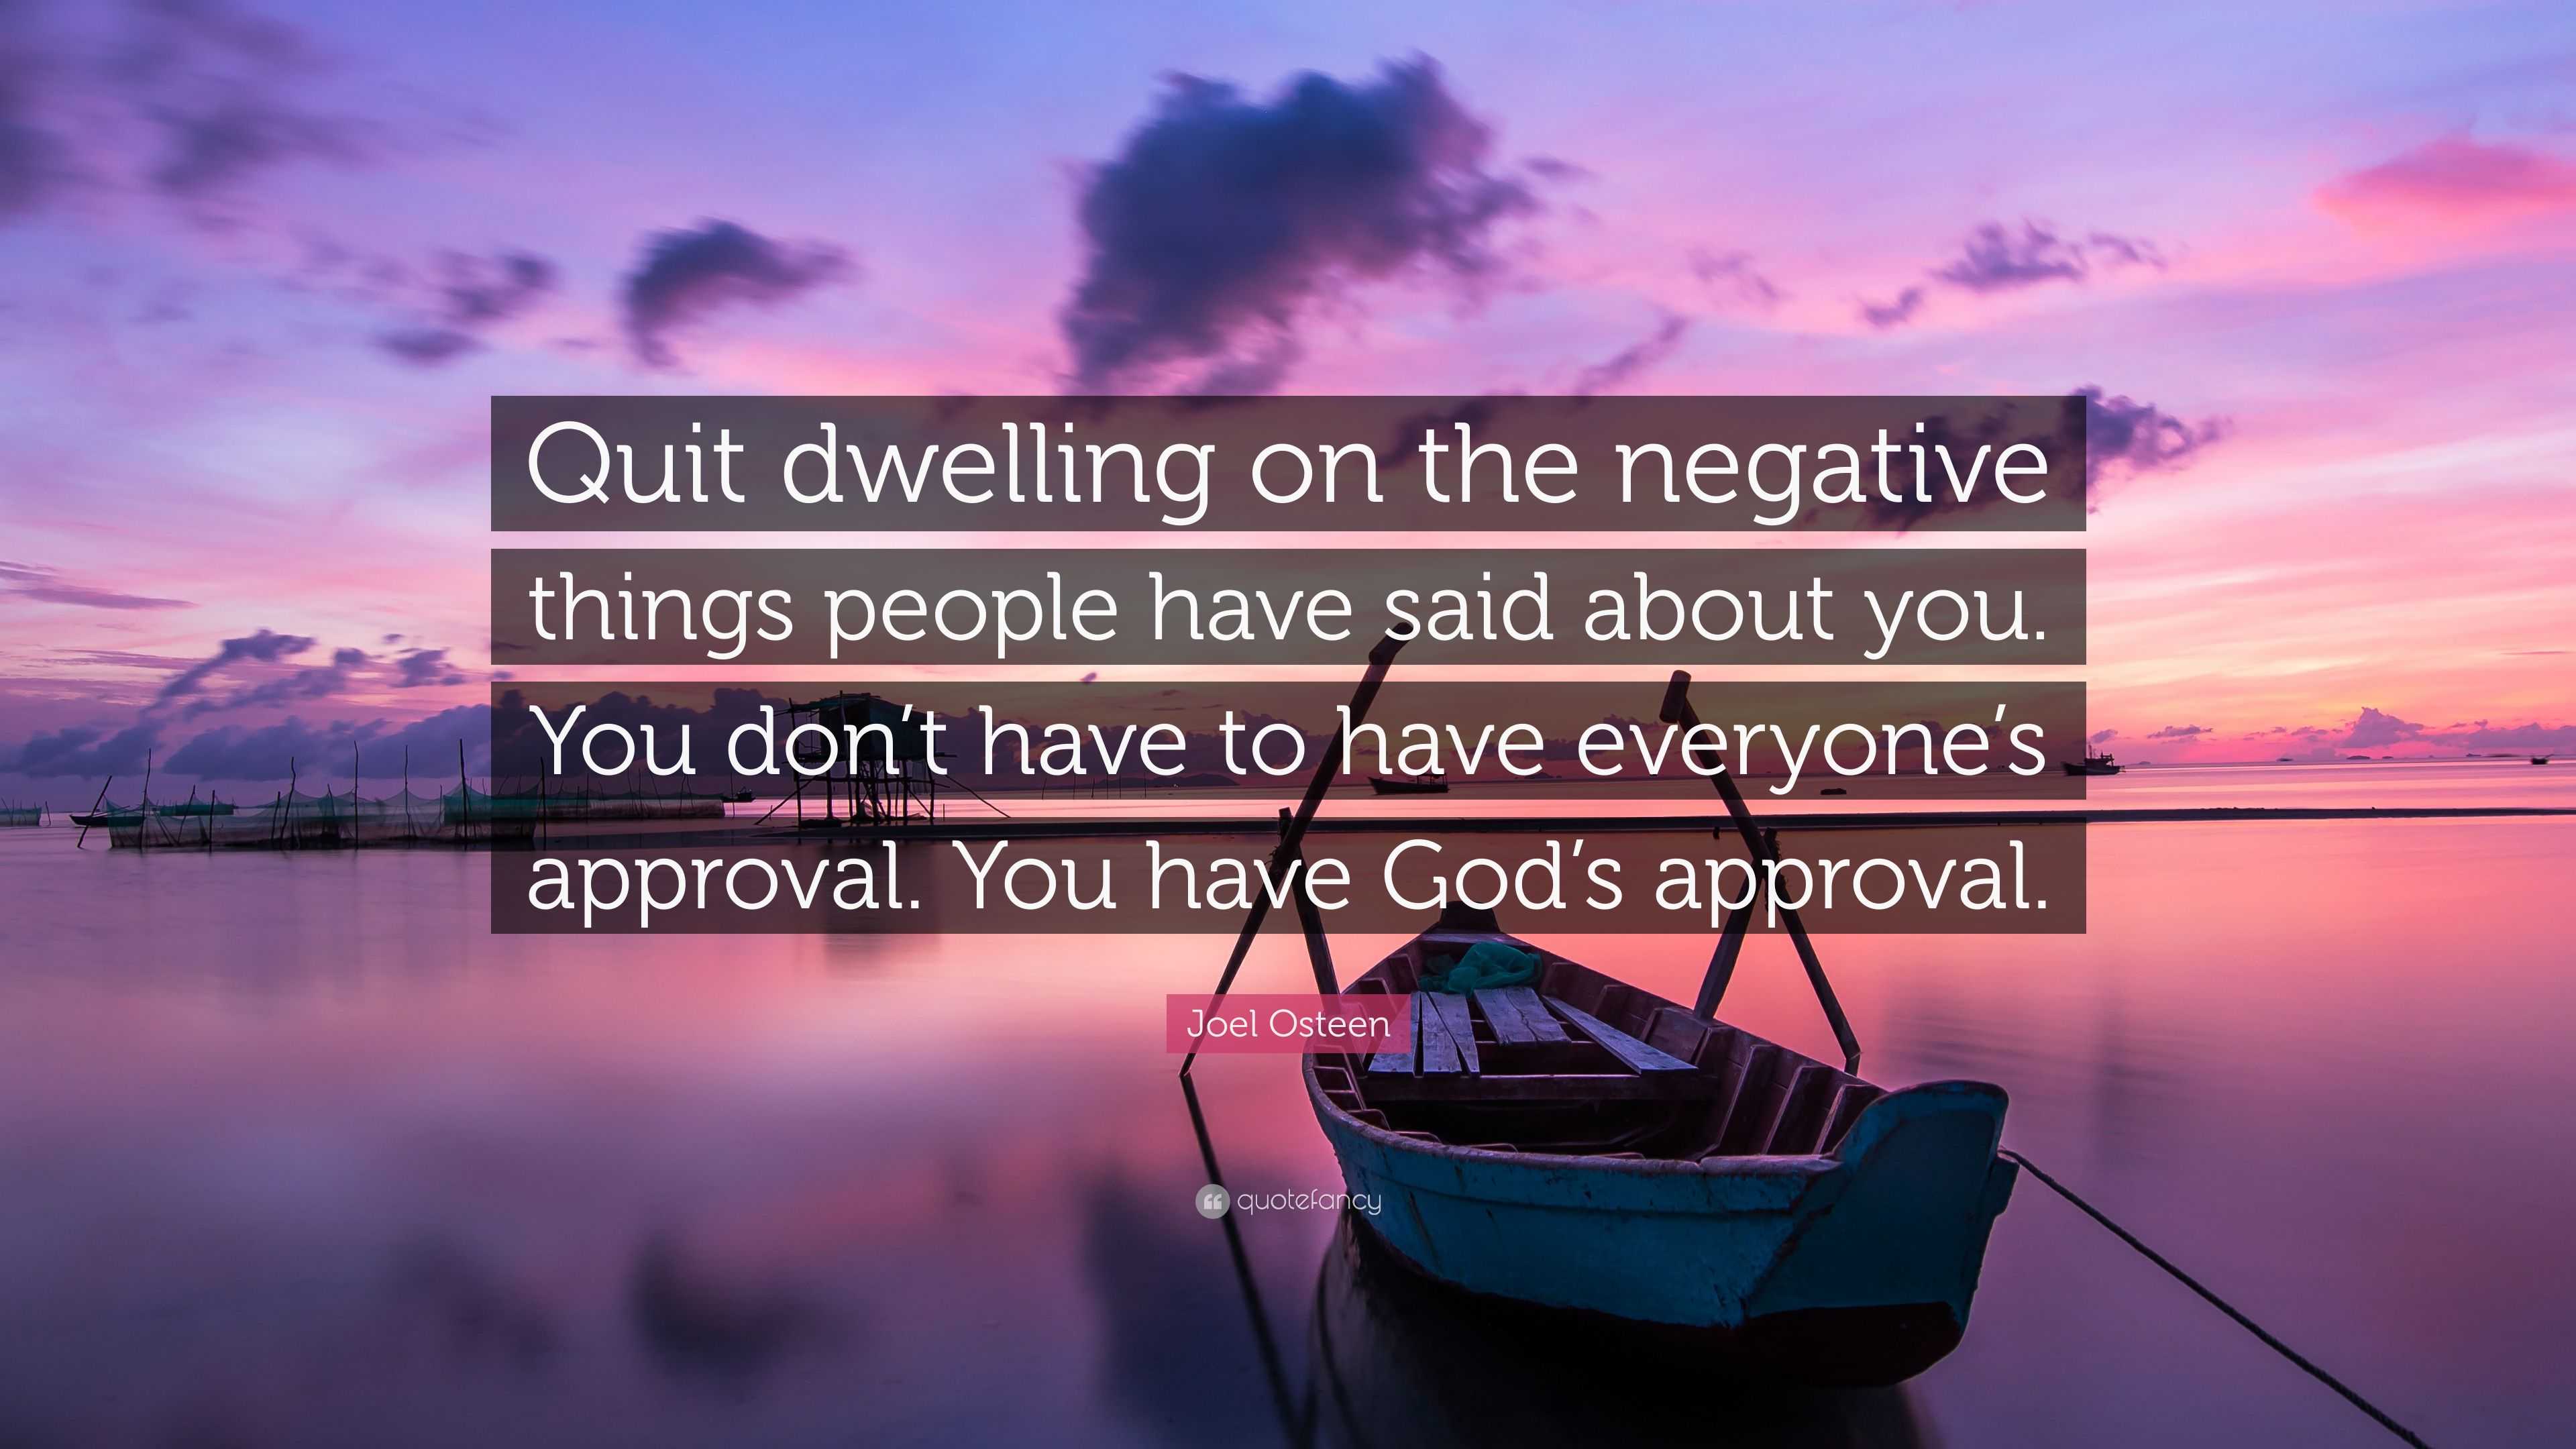 Joel Osteen Quote: "Quit dwelling on the negative things ...